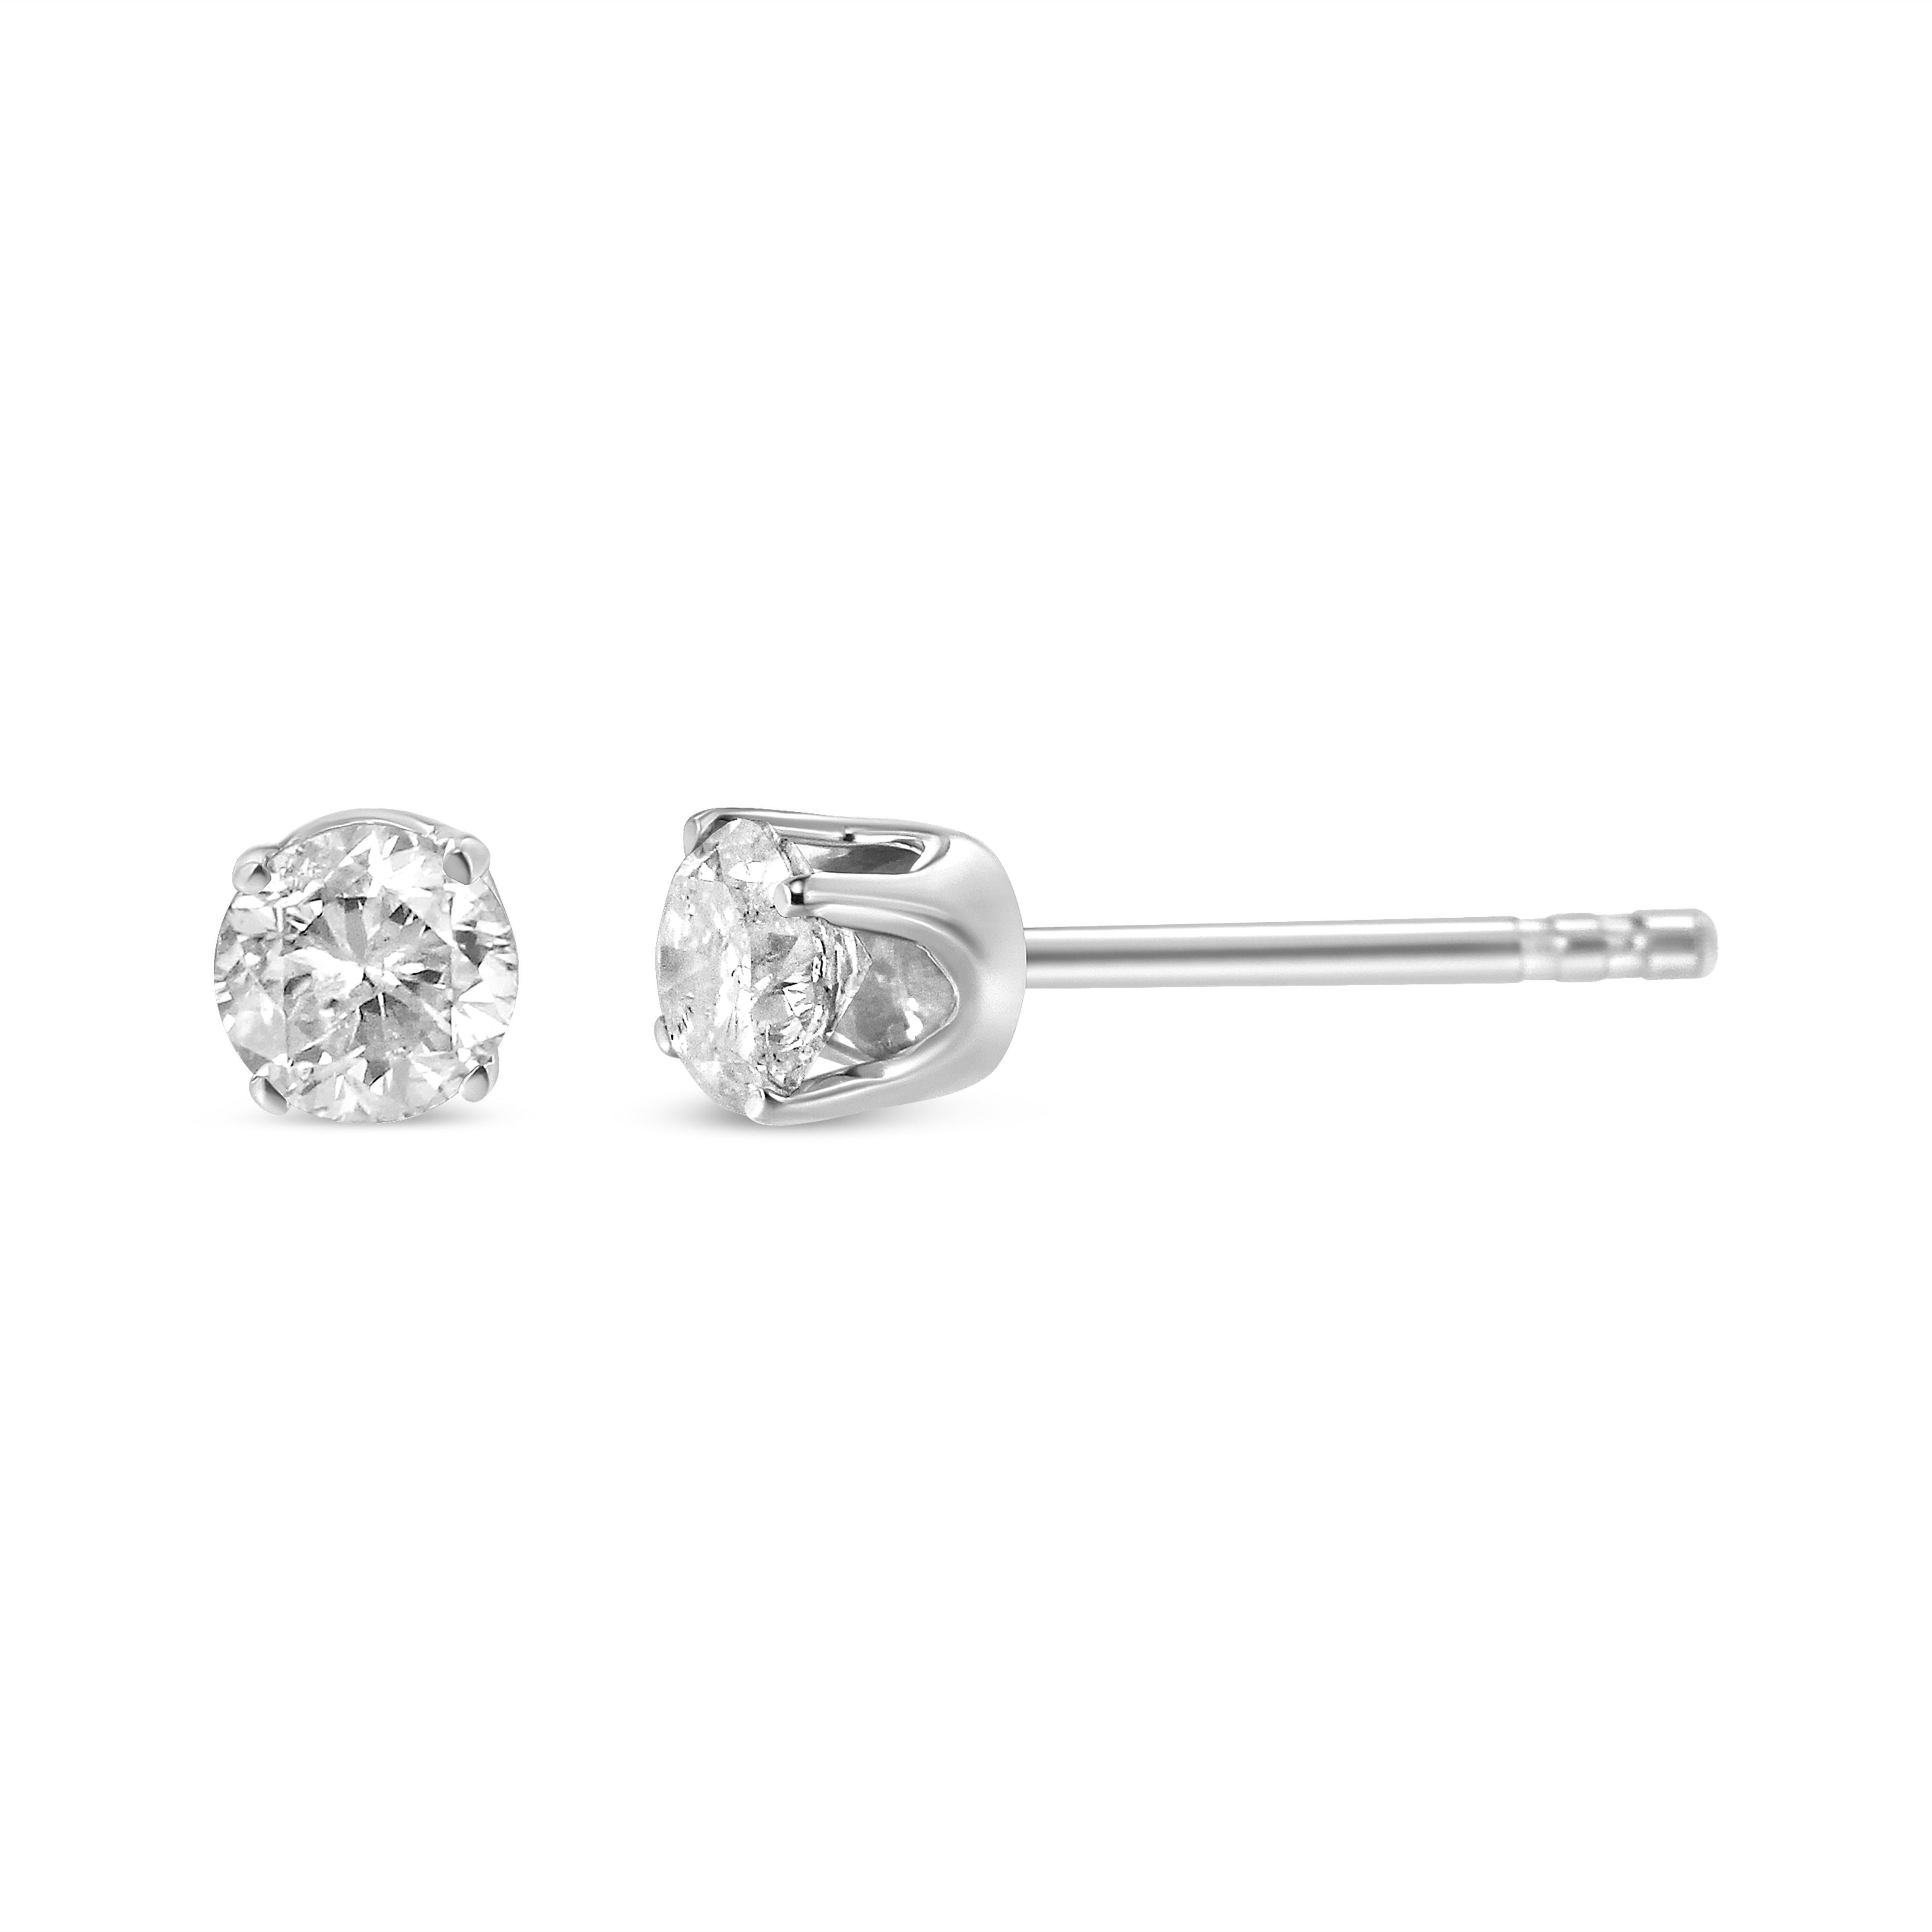 Contemporary AGS Certified 14K White Gold 1.0 Carat Diamond Push Back Stud Earrings For Sale